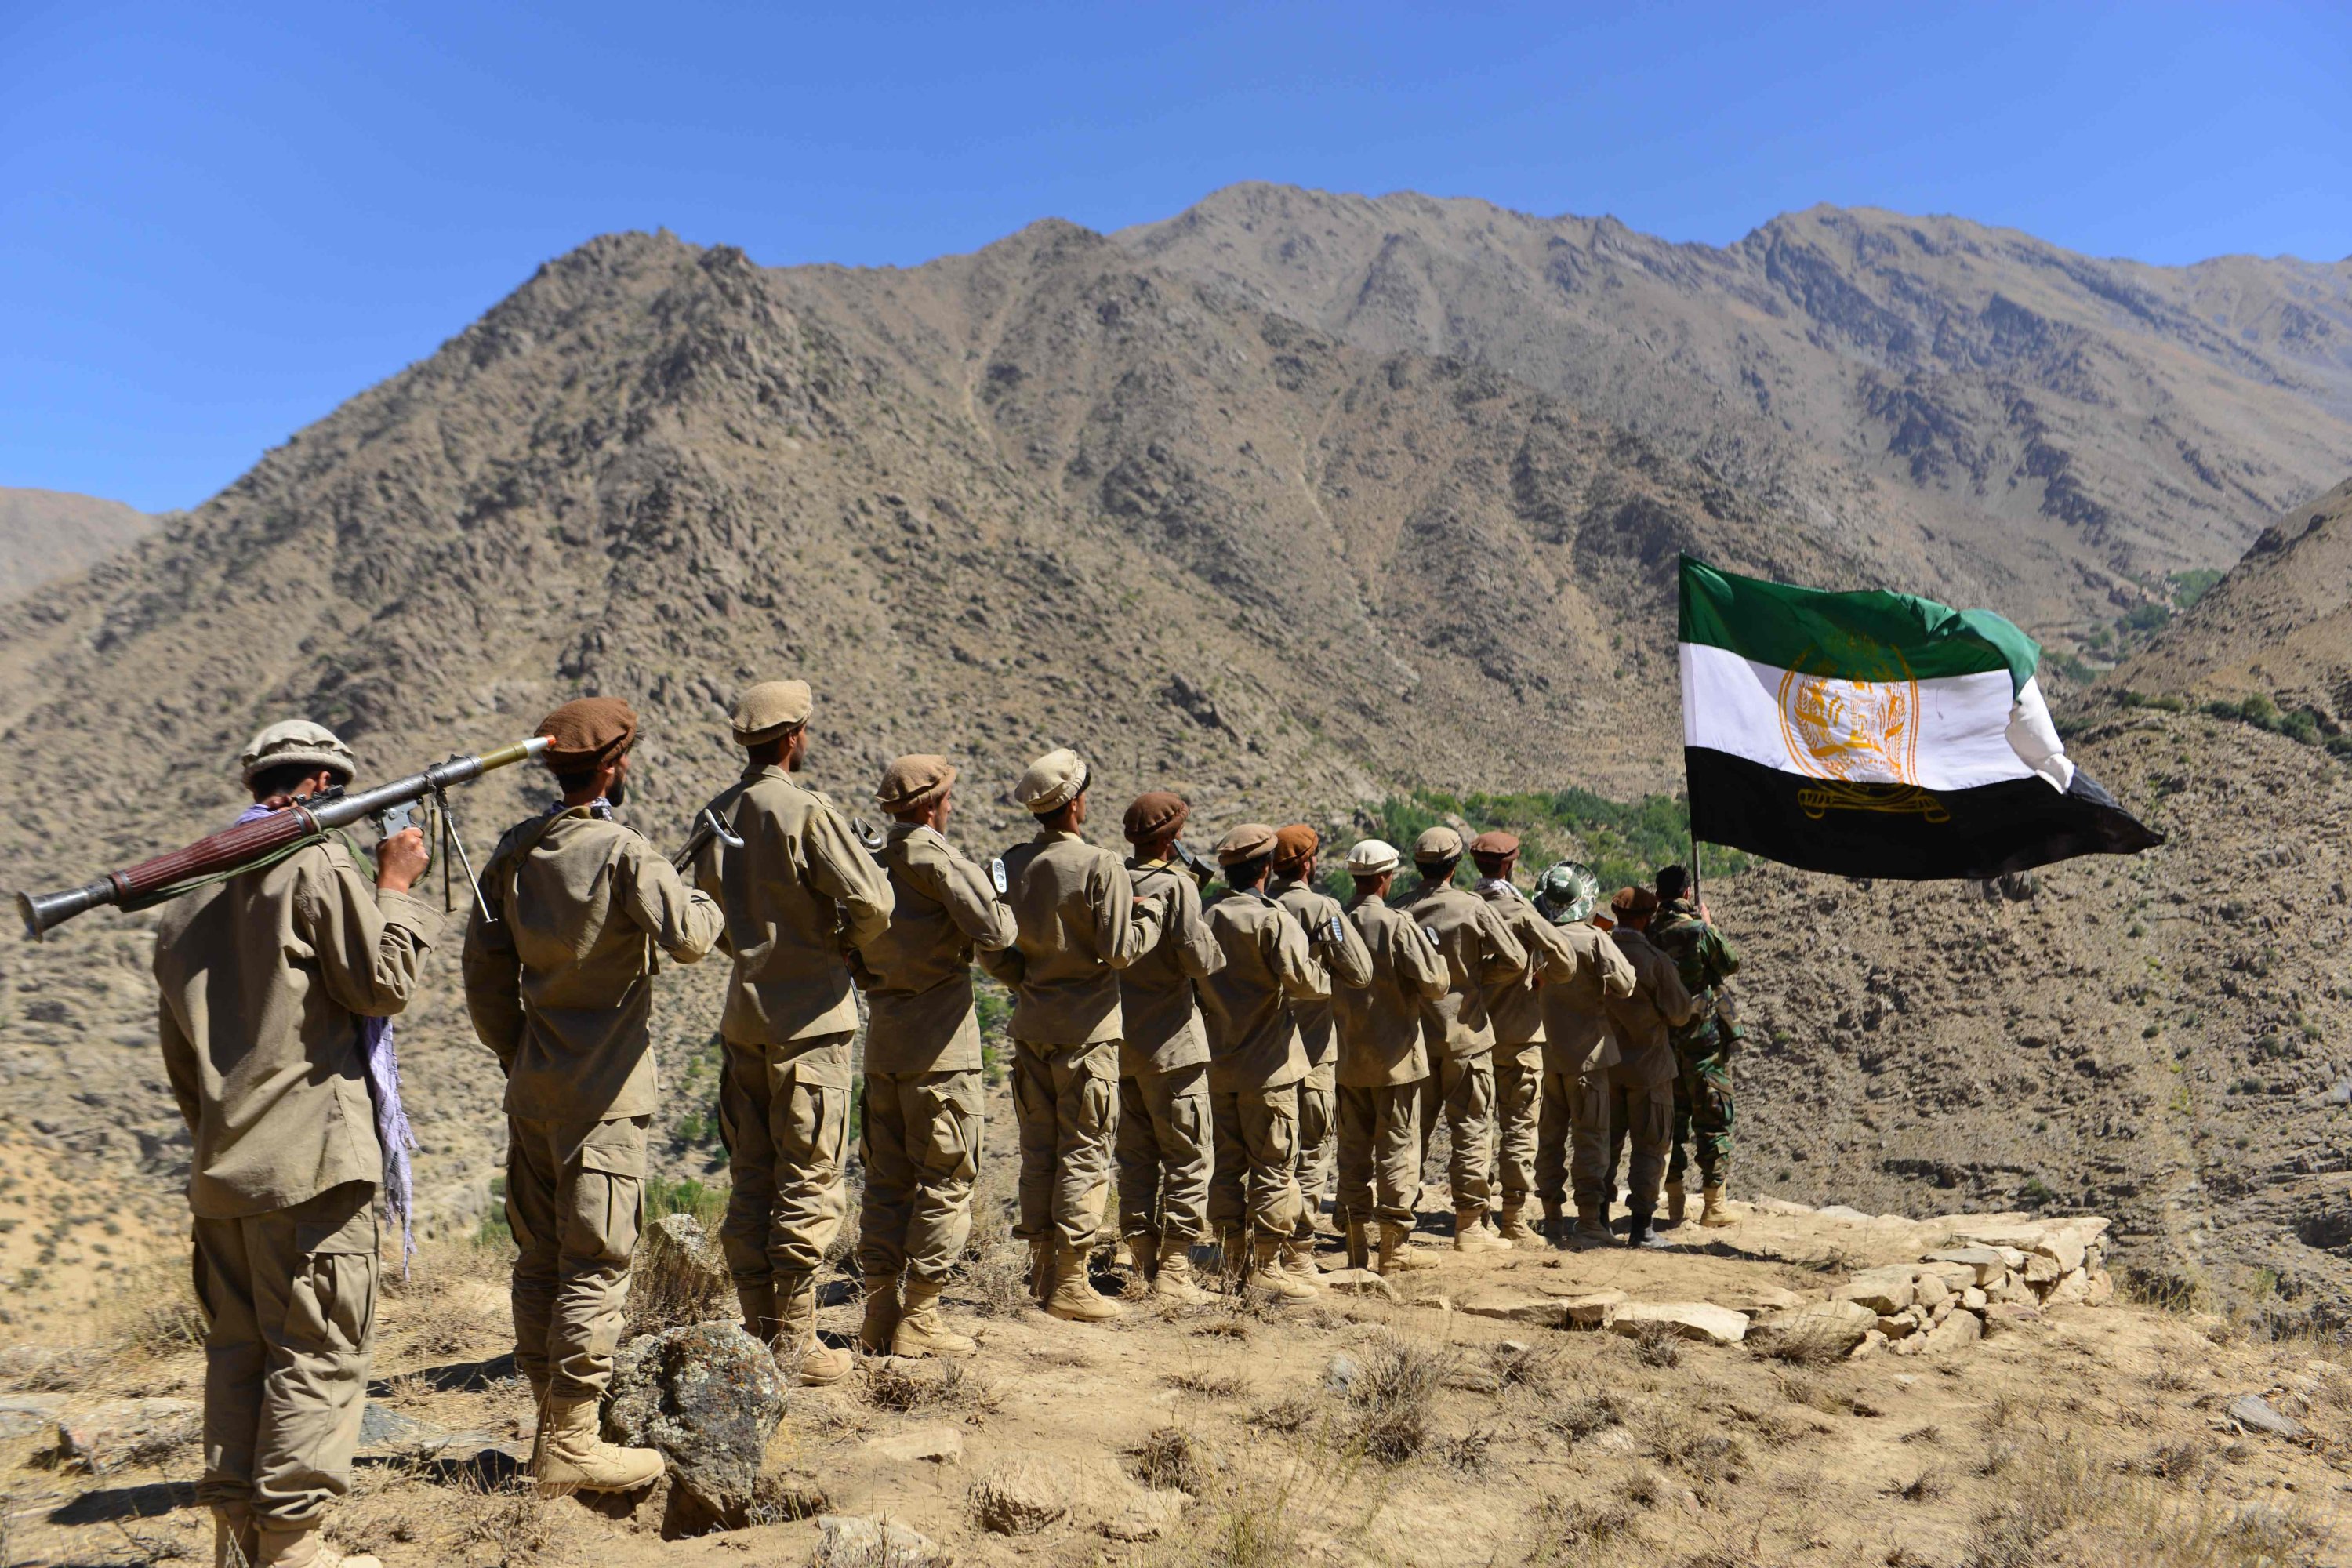 Afghan resistance movement and anti-Taliban uprising forces take part in military training at Malimah area of Dara district in Panjshir province, Afghanistan, Sept. 2, 2021, as the valley remains the last major holdout of anti-Taliban forces. (AFP Photo)